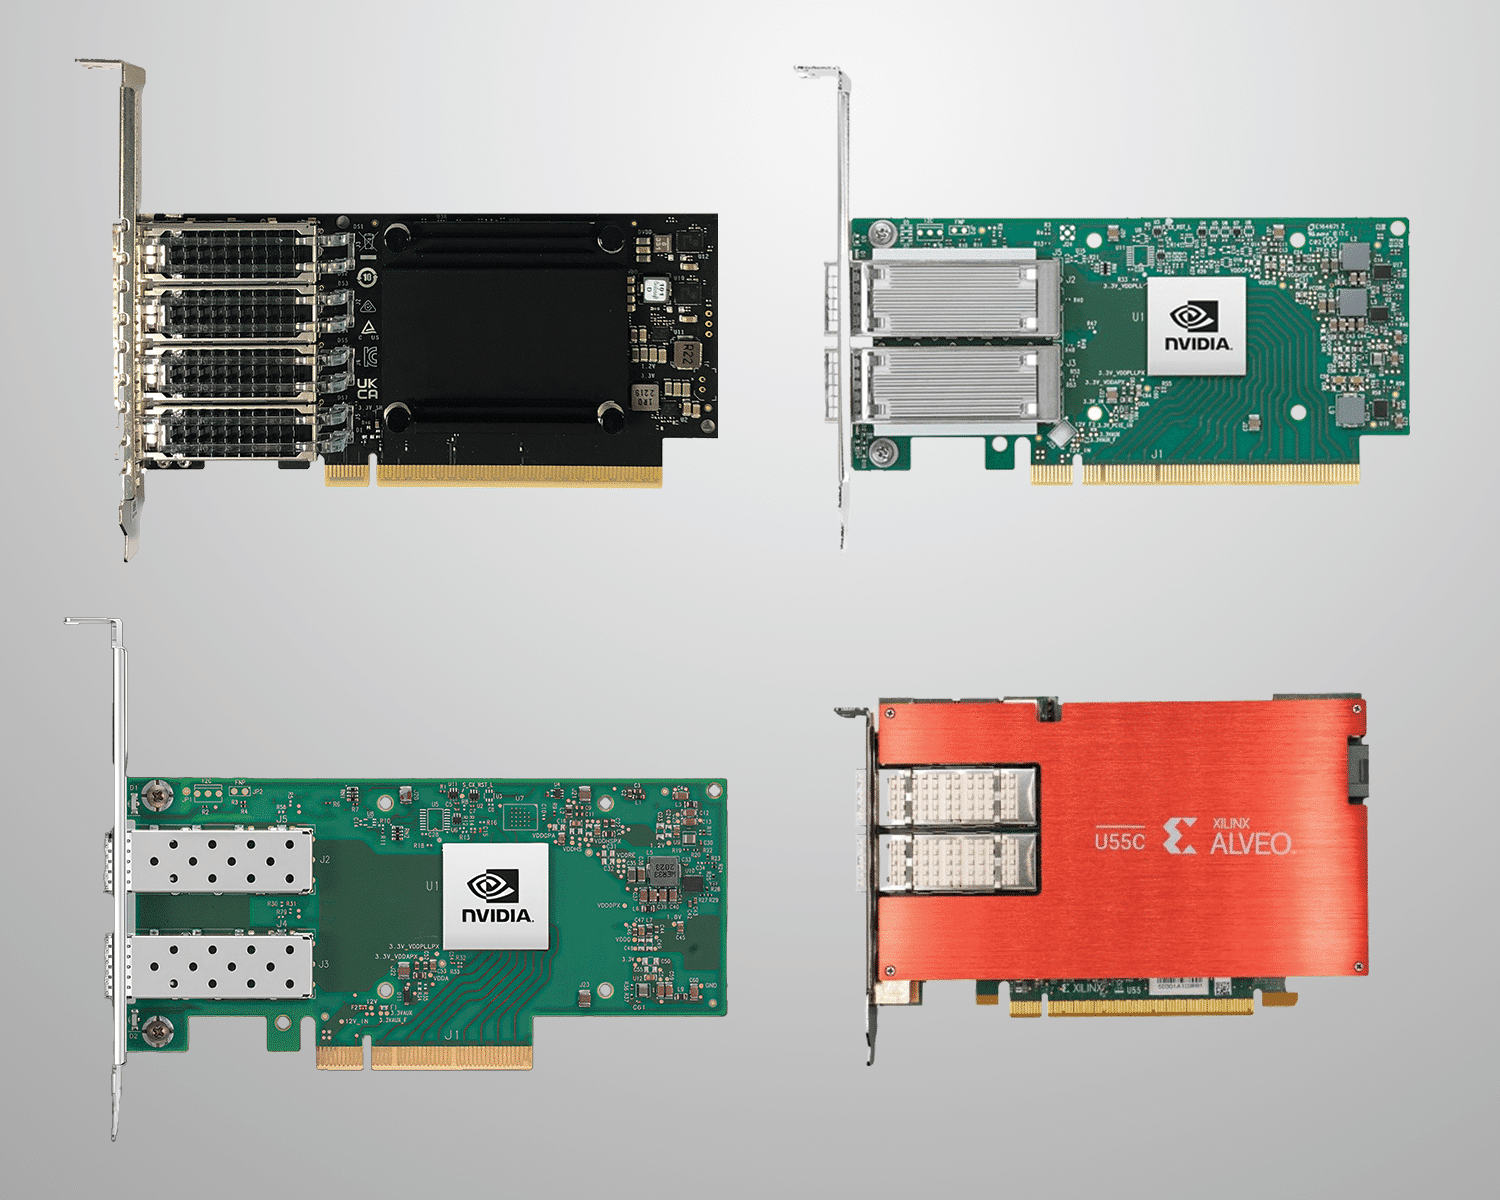 Network interface cards from AMD, Broadcom, NVIDIA